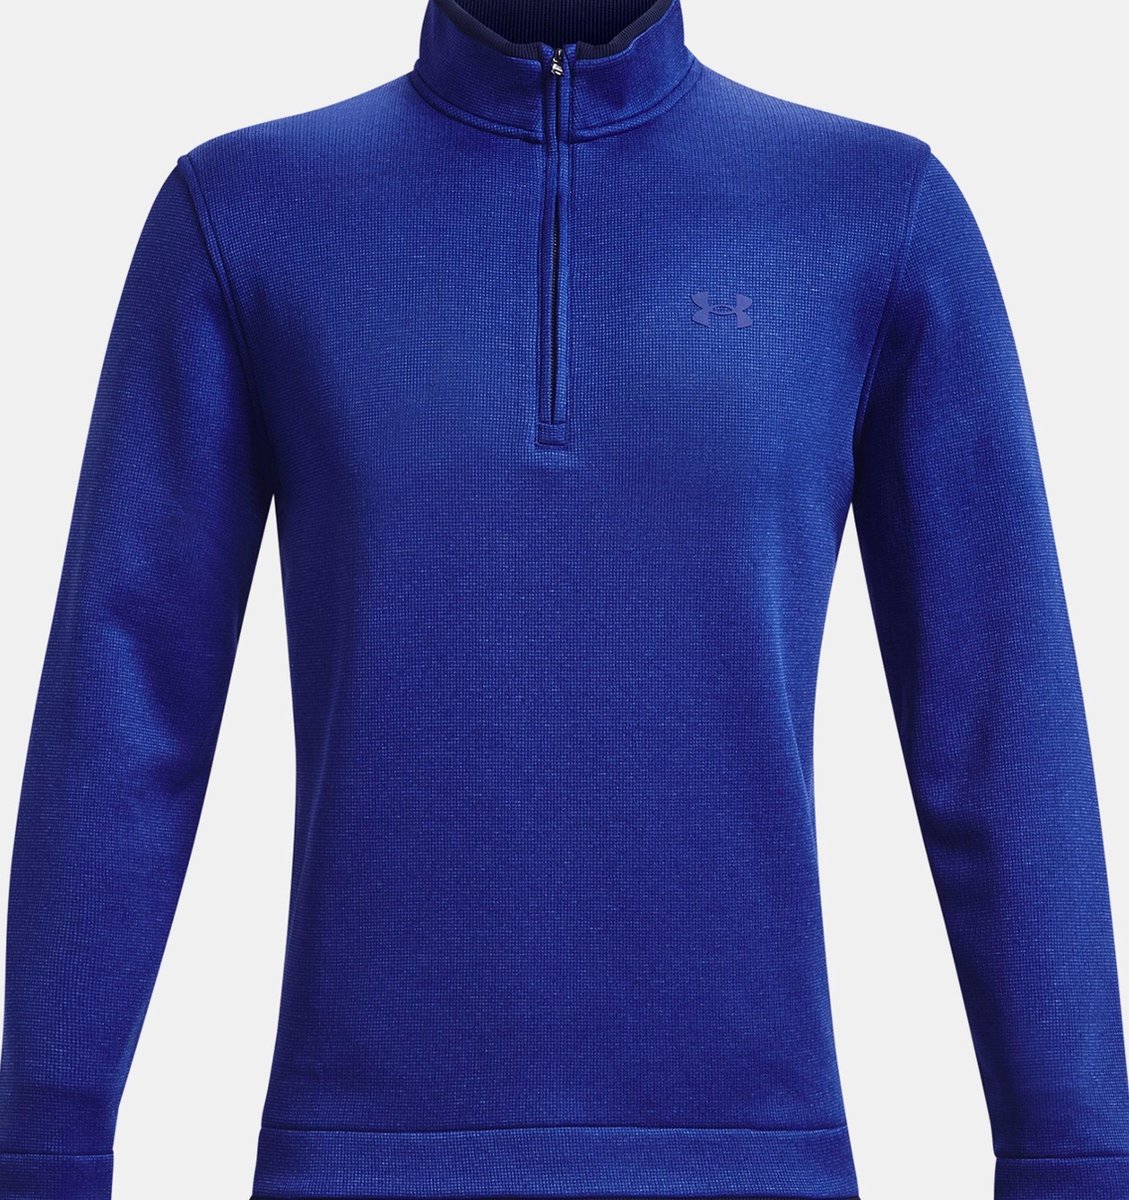 Under Armour Storm SF 1/2 Zip Royal Blue